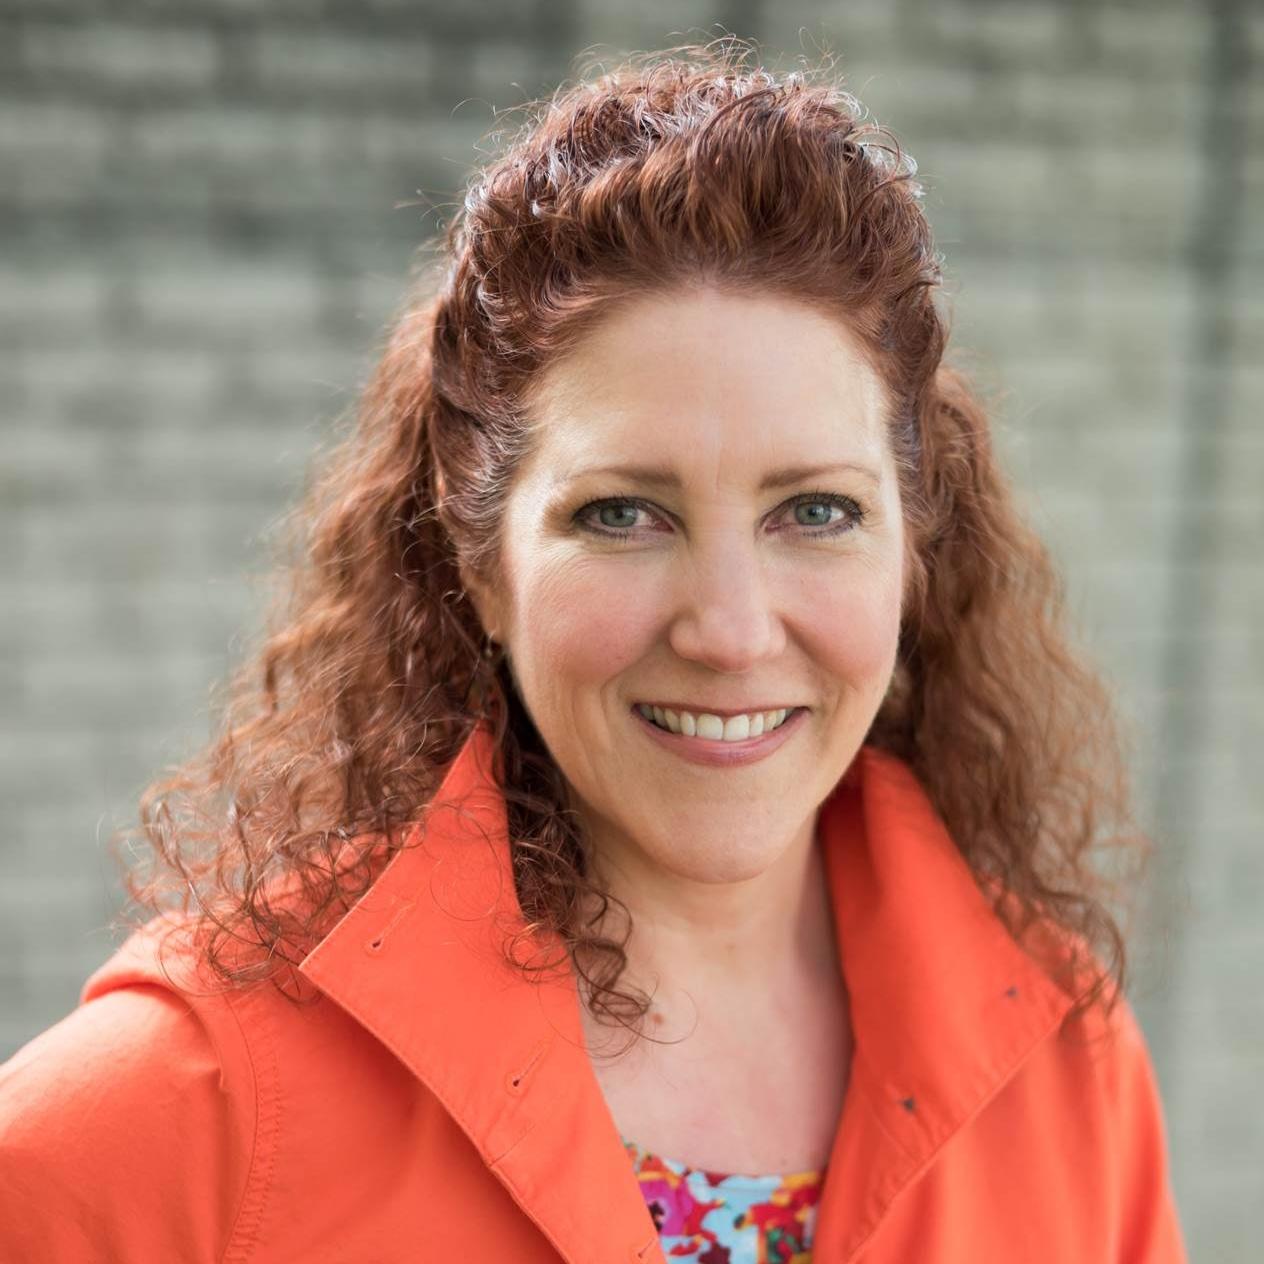 Tracy is smiling and looking at the camera. She has red, curly hair. She is wearing a flowery top with an orange coat over it against a blurred background of grey bricks.